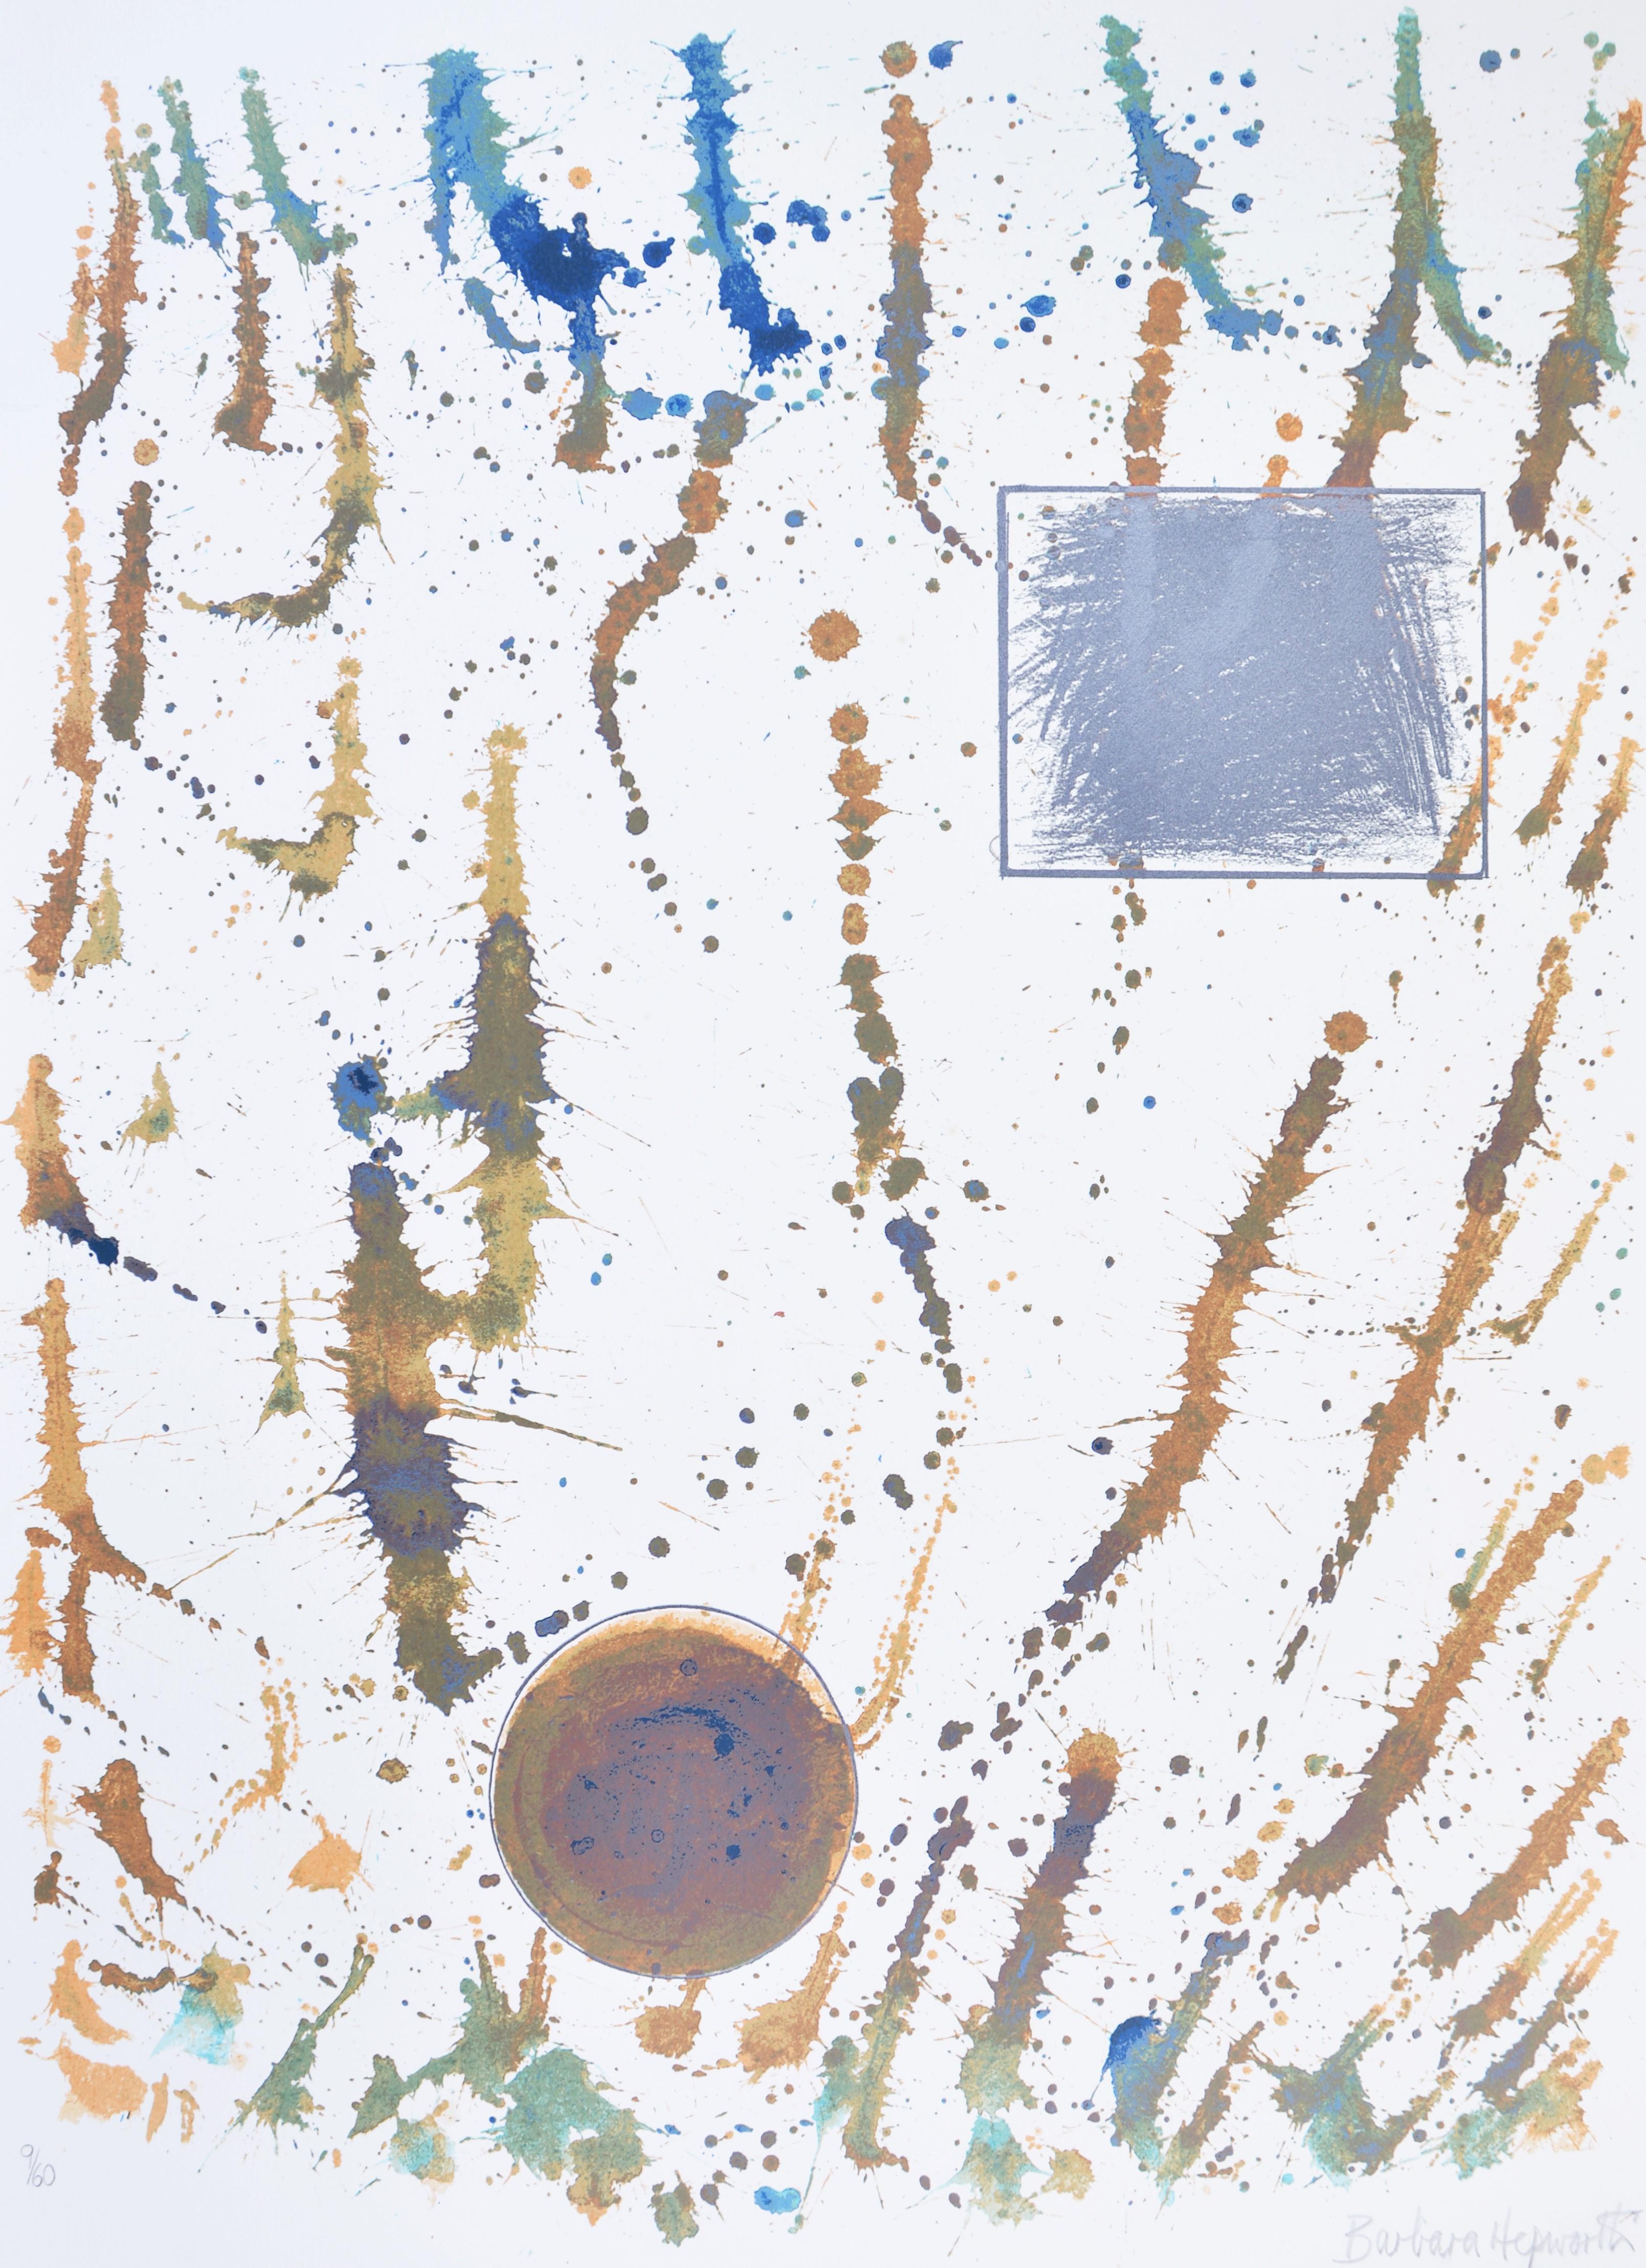 Forms in a Flurry - Print by Barbara Hepworth